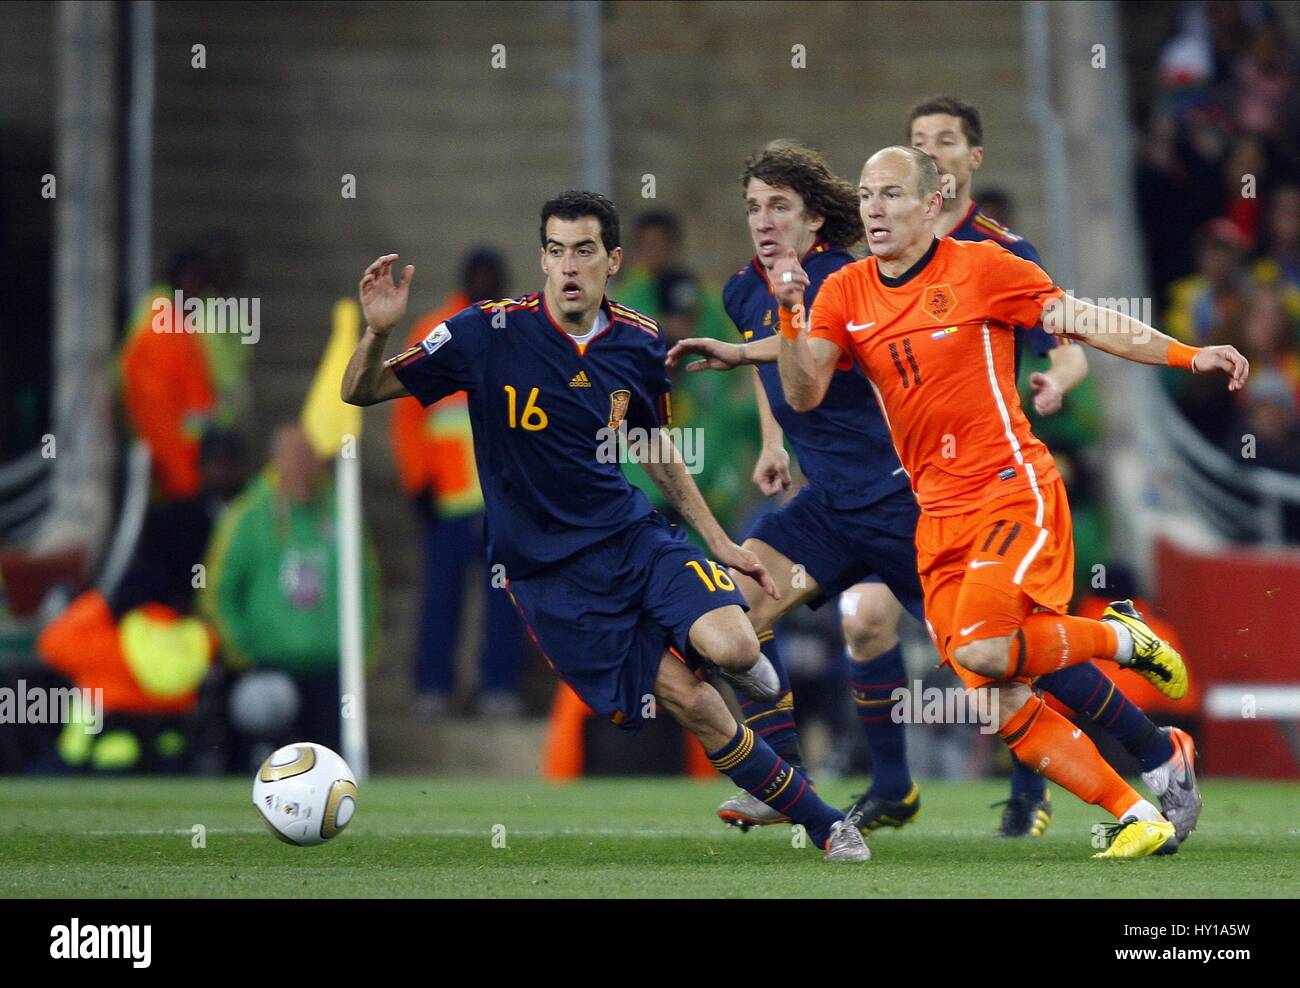 SERGIO BUSQUETS CARLES PUYOL NETHERLANDS V SPAIN SOCCER CITY JOHANNESBURG SOUTH AFRICA 11 July 2010 Stock Photo